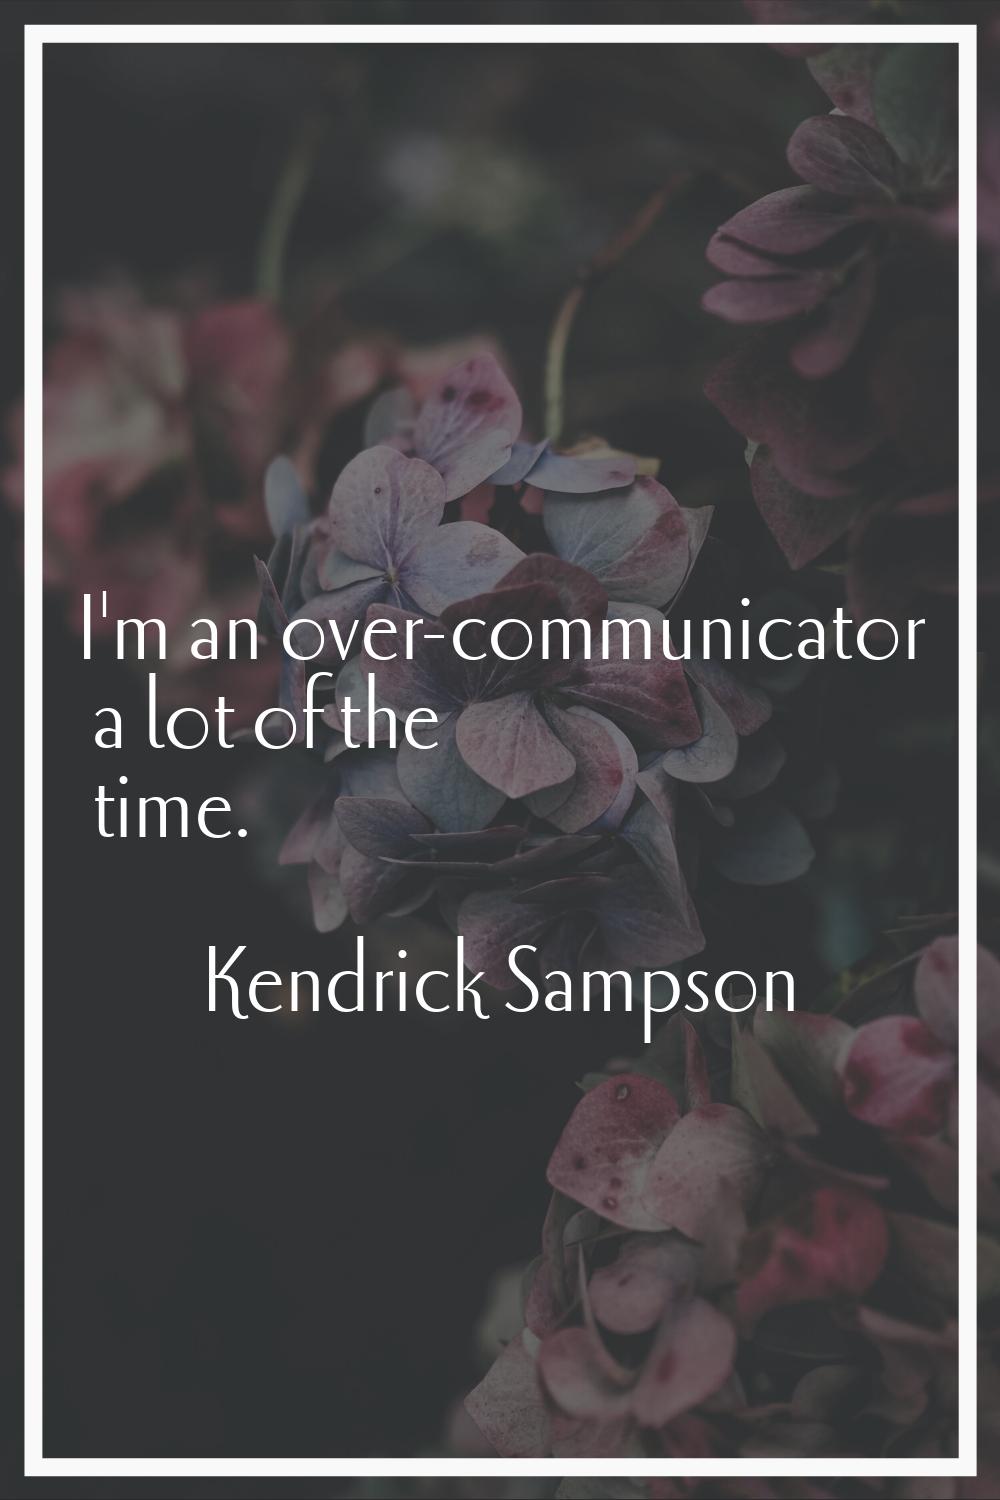 I'm an over-communicator a lot of the time.